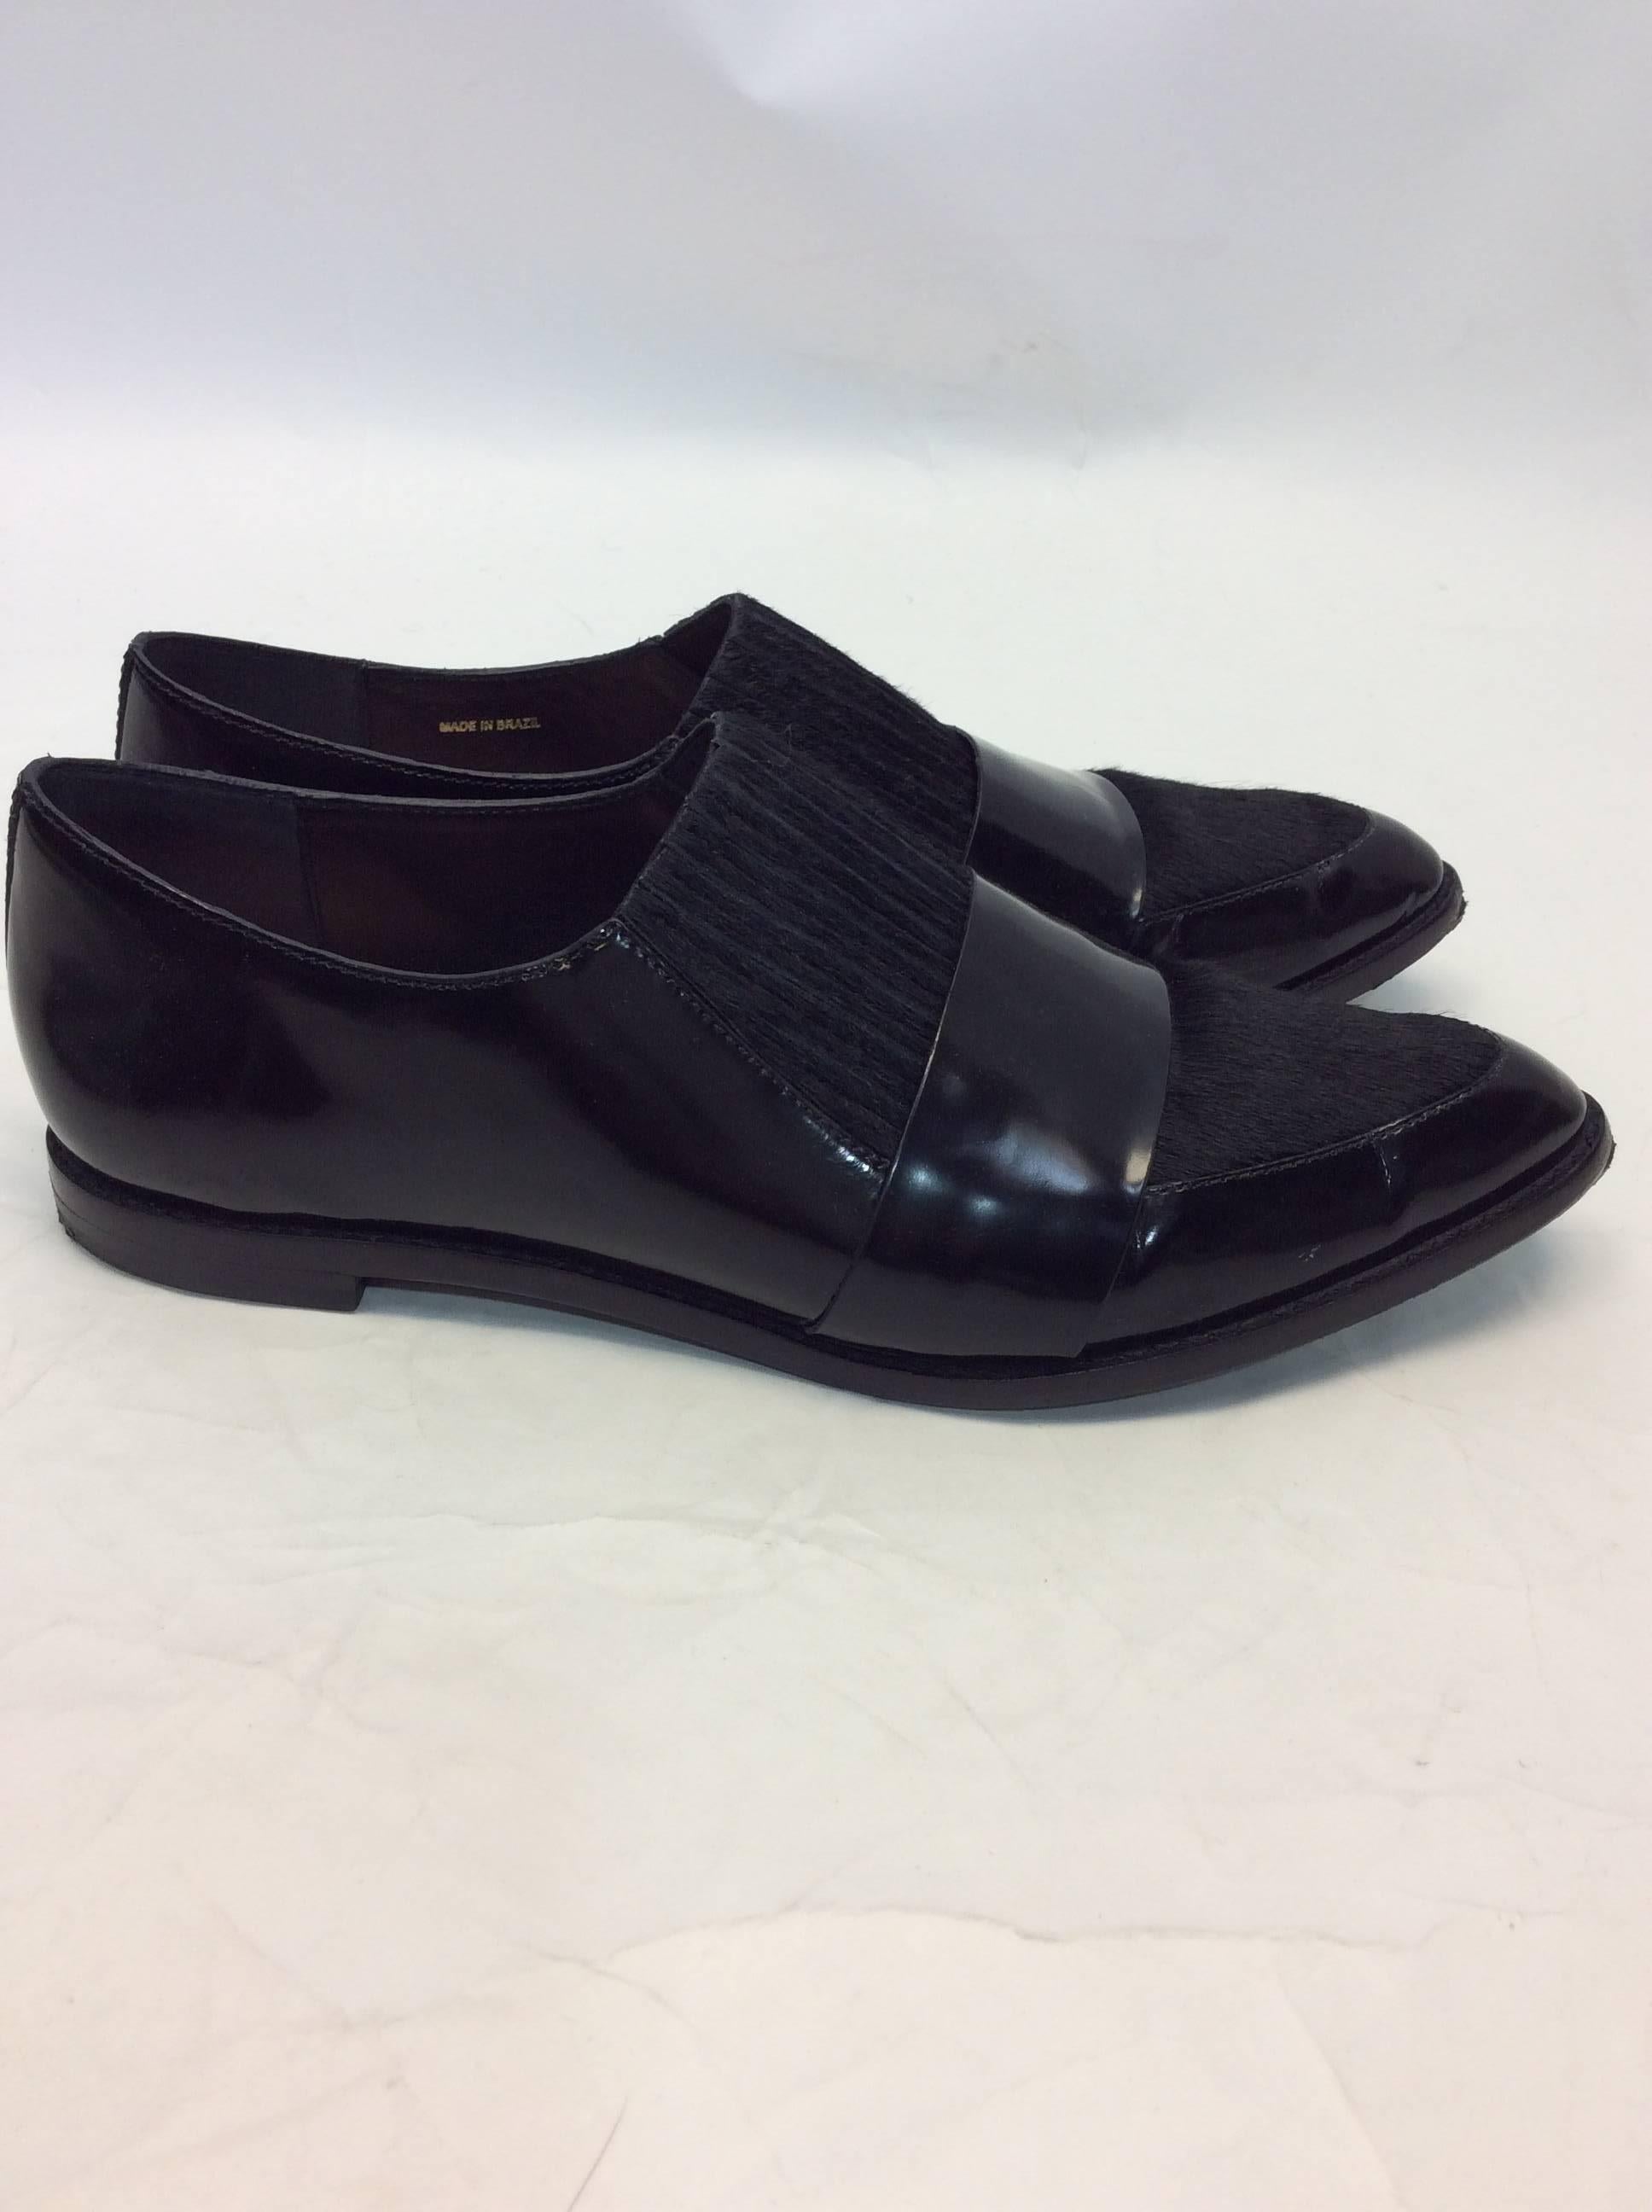 Loeffler Randall Rose Patent Leather & Calf Hair Loafer
Polished pointed toe with calf hair panels
Slip on style
Made in Brazil
Size 9
New: $375
Our Price: $175
